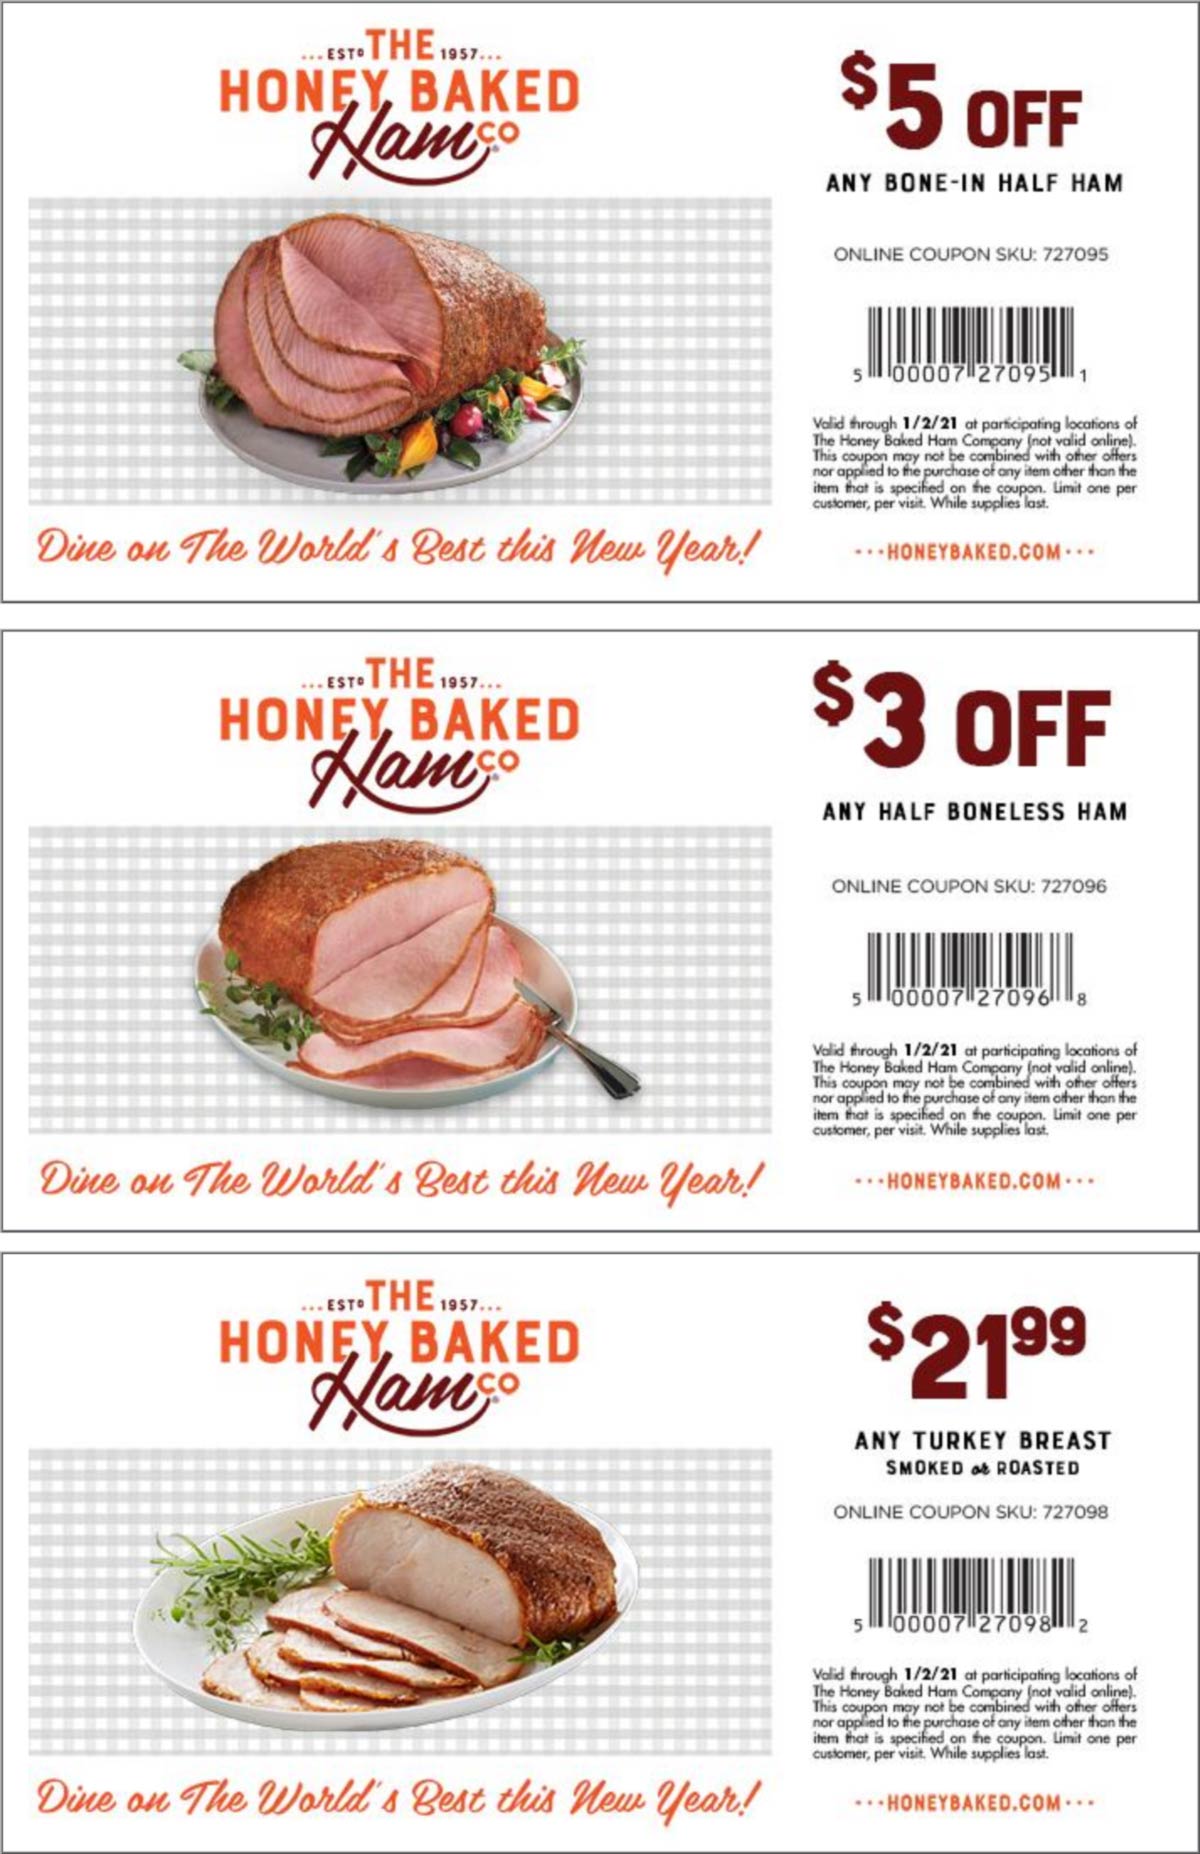 Honeybaked restaurants Coupon  $5 off ham & more at Honeybaked restaurants #honeybaked 